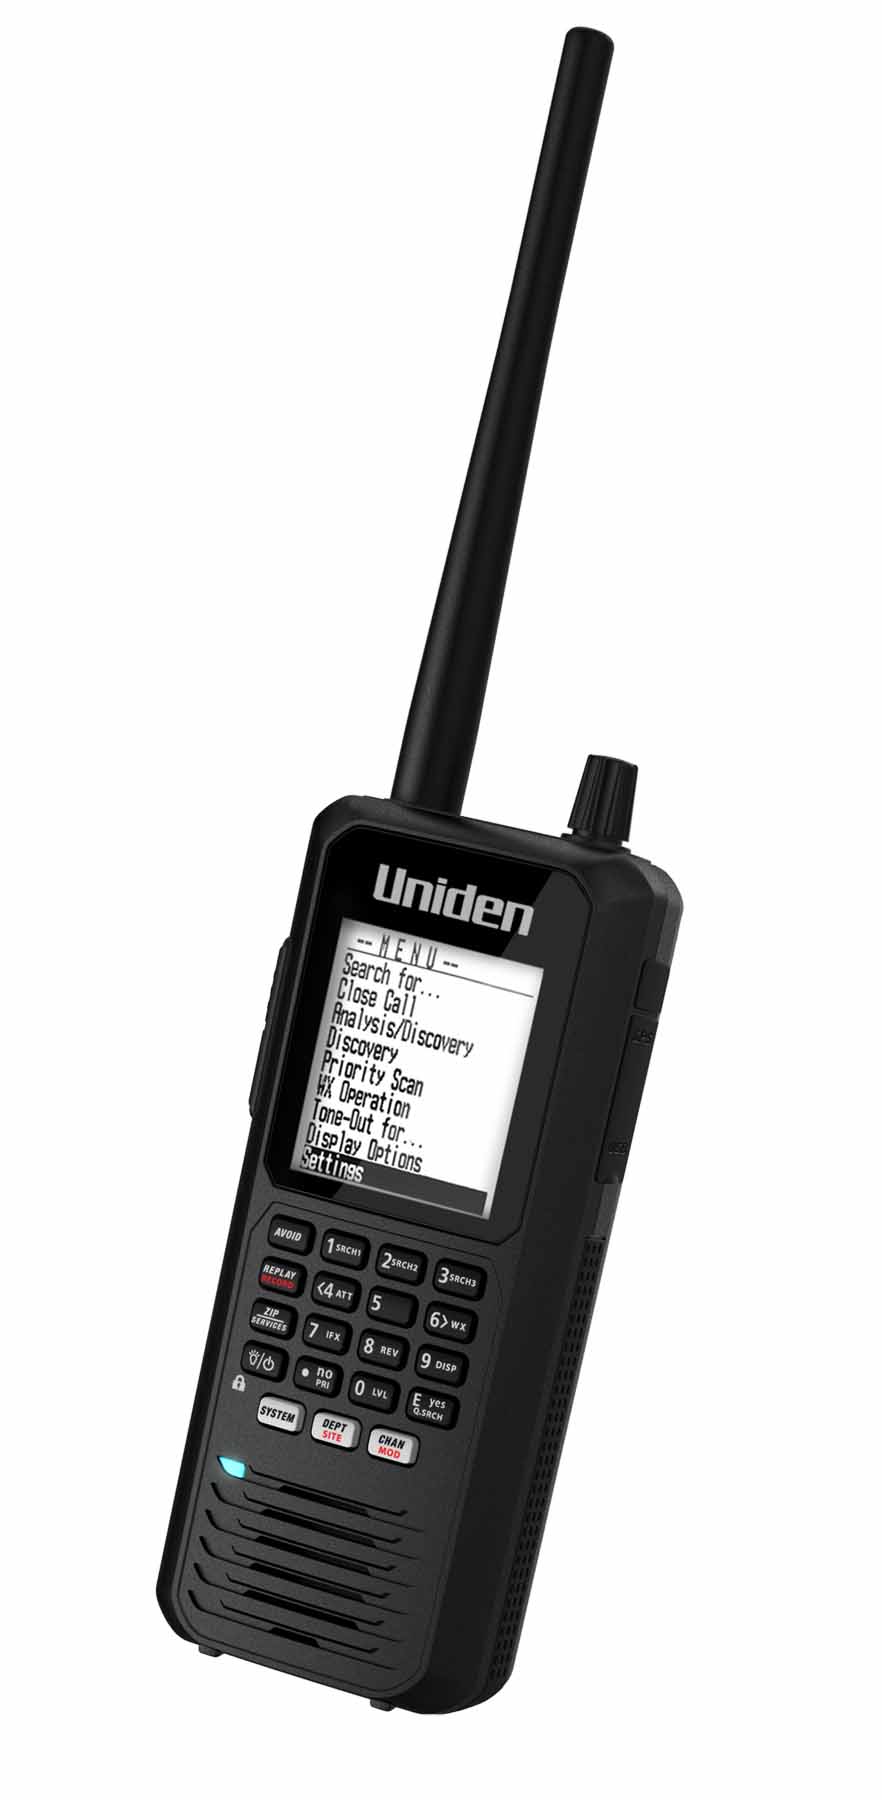 UNIDEN BCD436HP DIGITAL HANDHELD NARROW BAND SCANNER WITH EASY ZIP CODE PROGRAMMING FEATURE